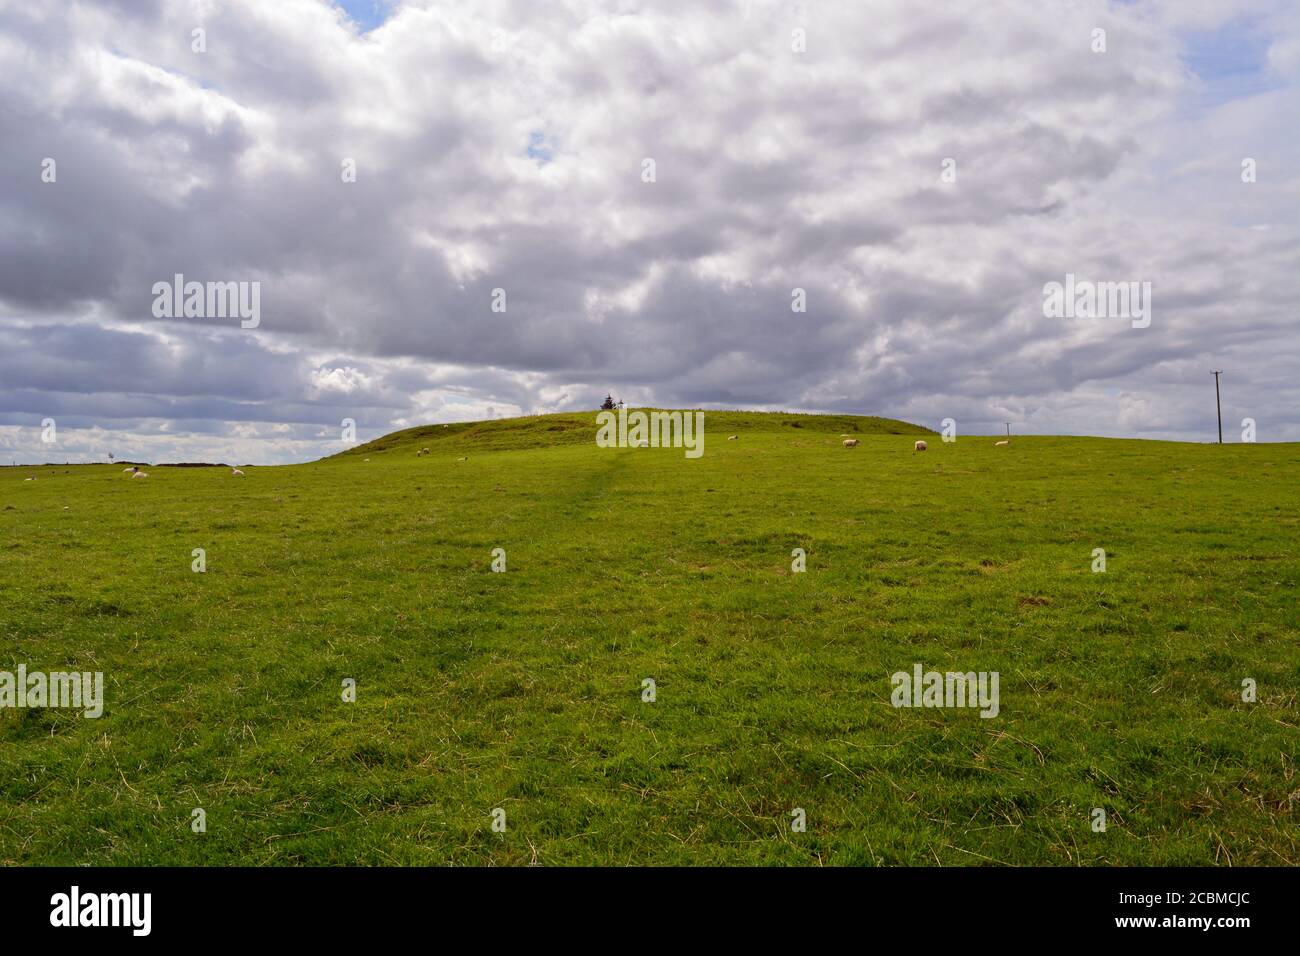 Rathcroghan, Ráth Cruachan, royal and ceremonial site in Connacht. The mound was once crowned with a massive wooden, round structure. Stock Photo